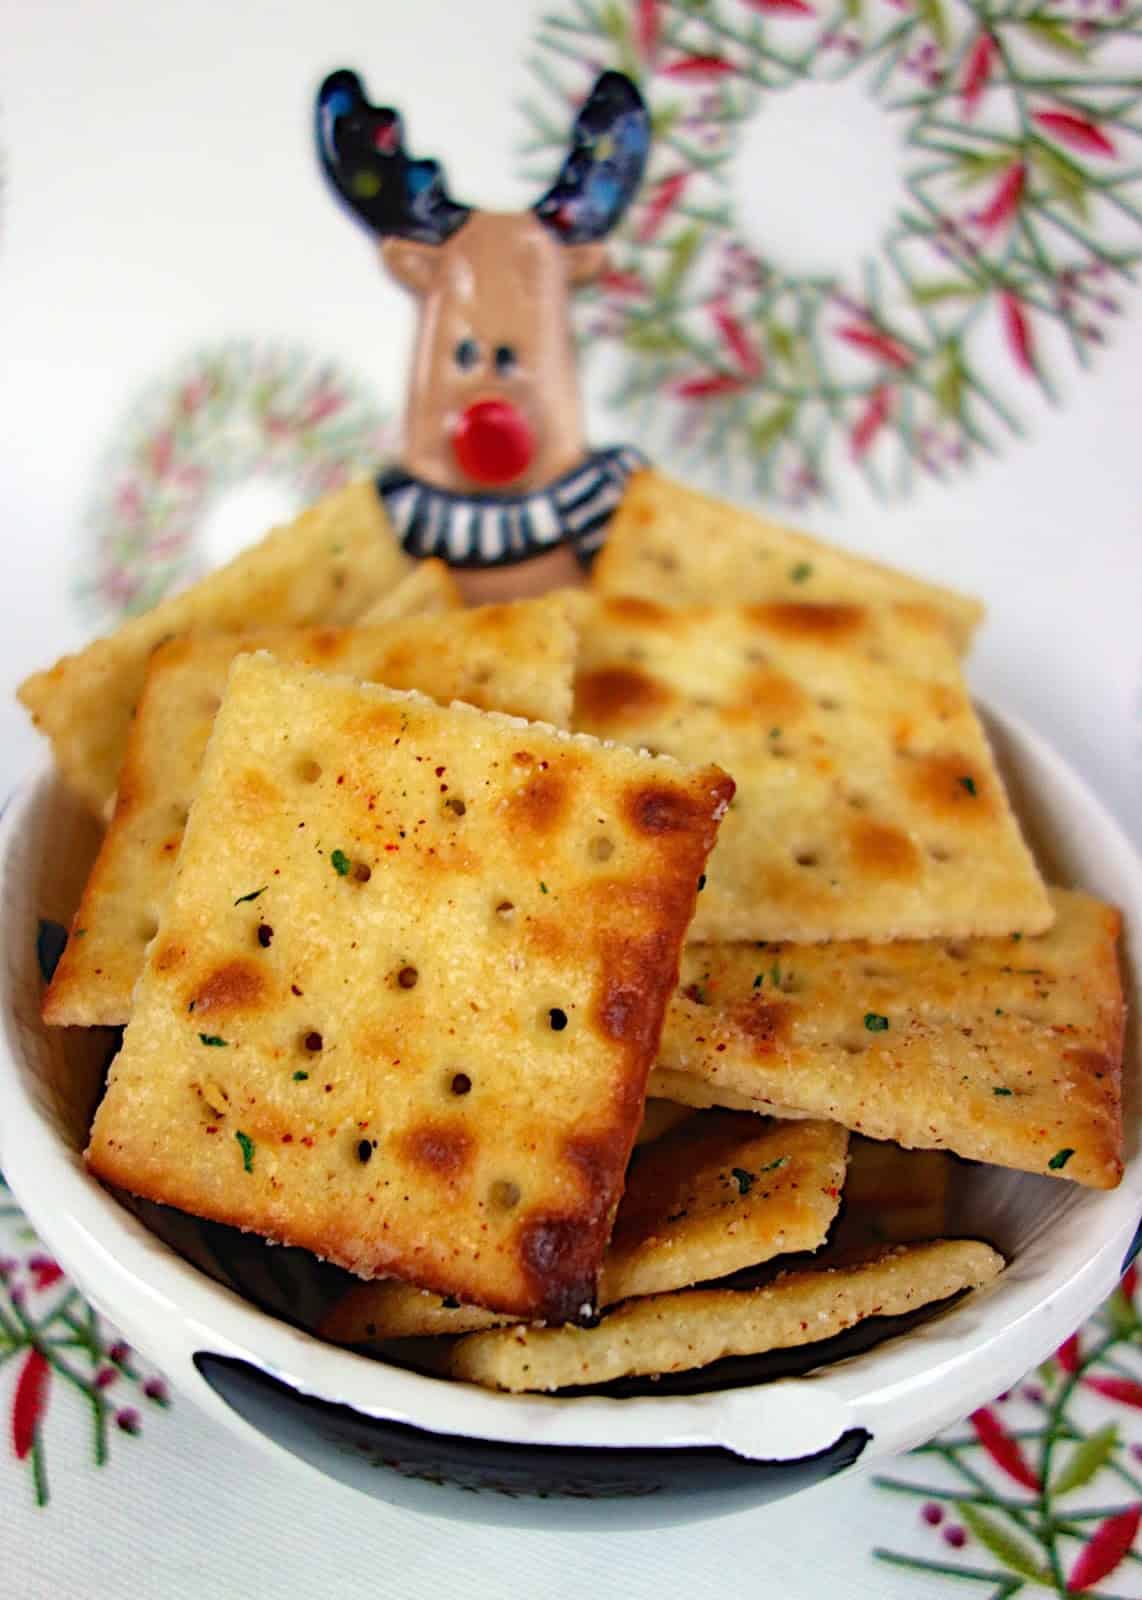 Spicy Ranch Crackers - no bake snack with only 4 ingredients! Great for snacking or in soups! These spicy crackers are SO addictive!!! Can adjust heat to your preference. Store for weeks in a ziplock bag. We LOVE this easy snack recipe!